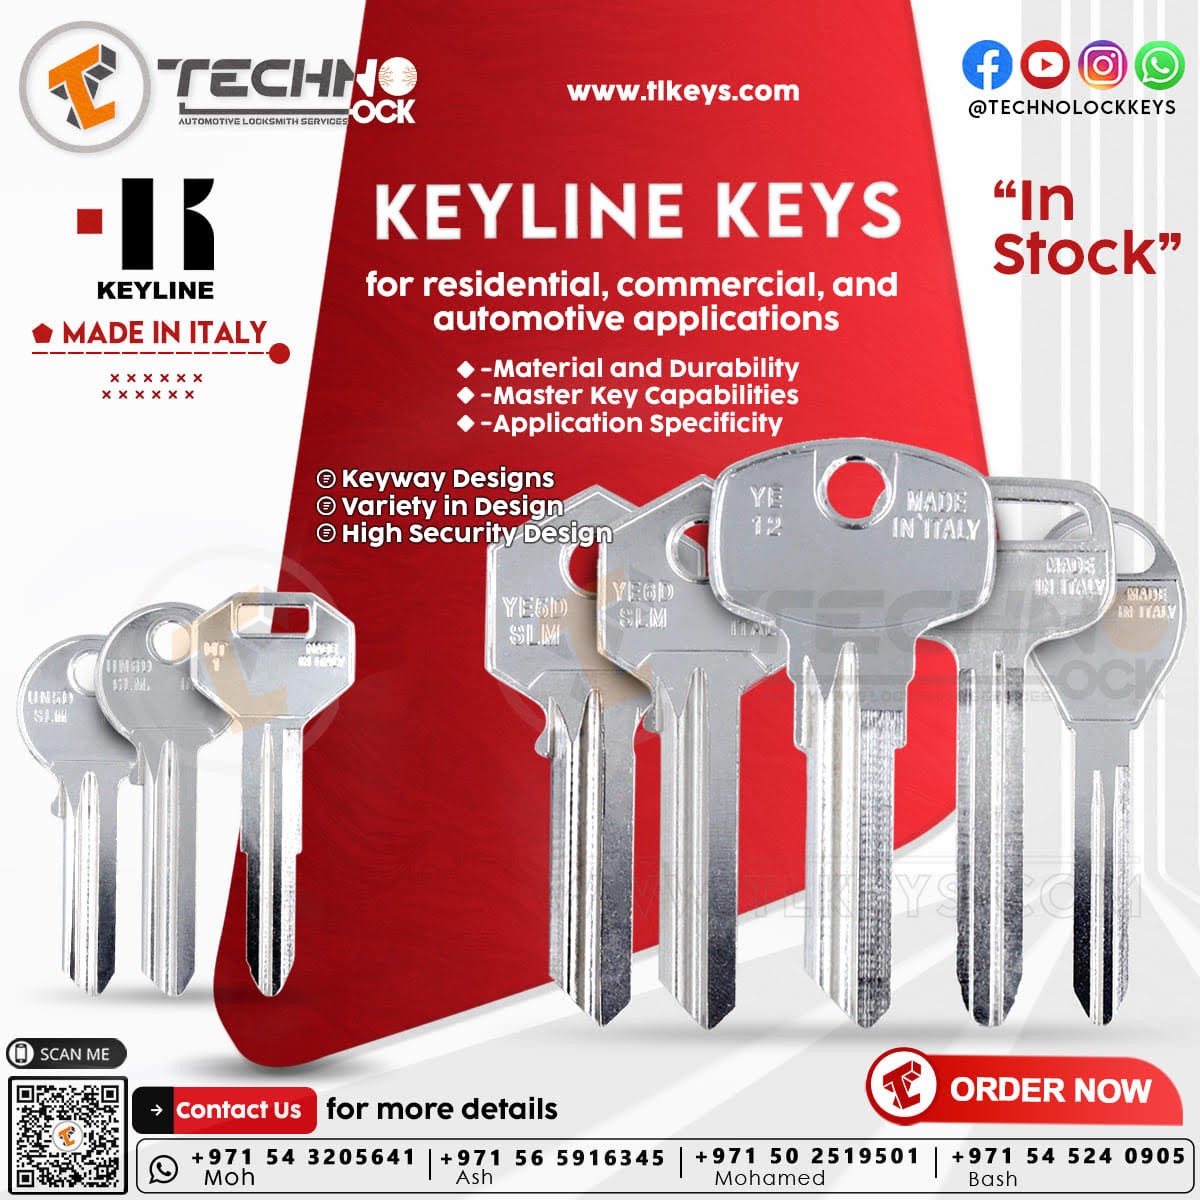 A close-up image of a Keyline replacement key, made from steel and finished in nickel plating, alongside a compatible lock system. The key is inserted into the lock's keyhole, ready to unlock or lock the door. The lock system may feature a transponder chip for electronic access control.